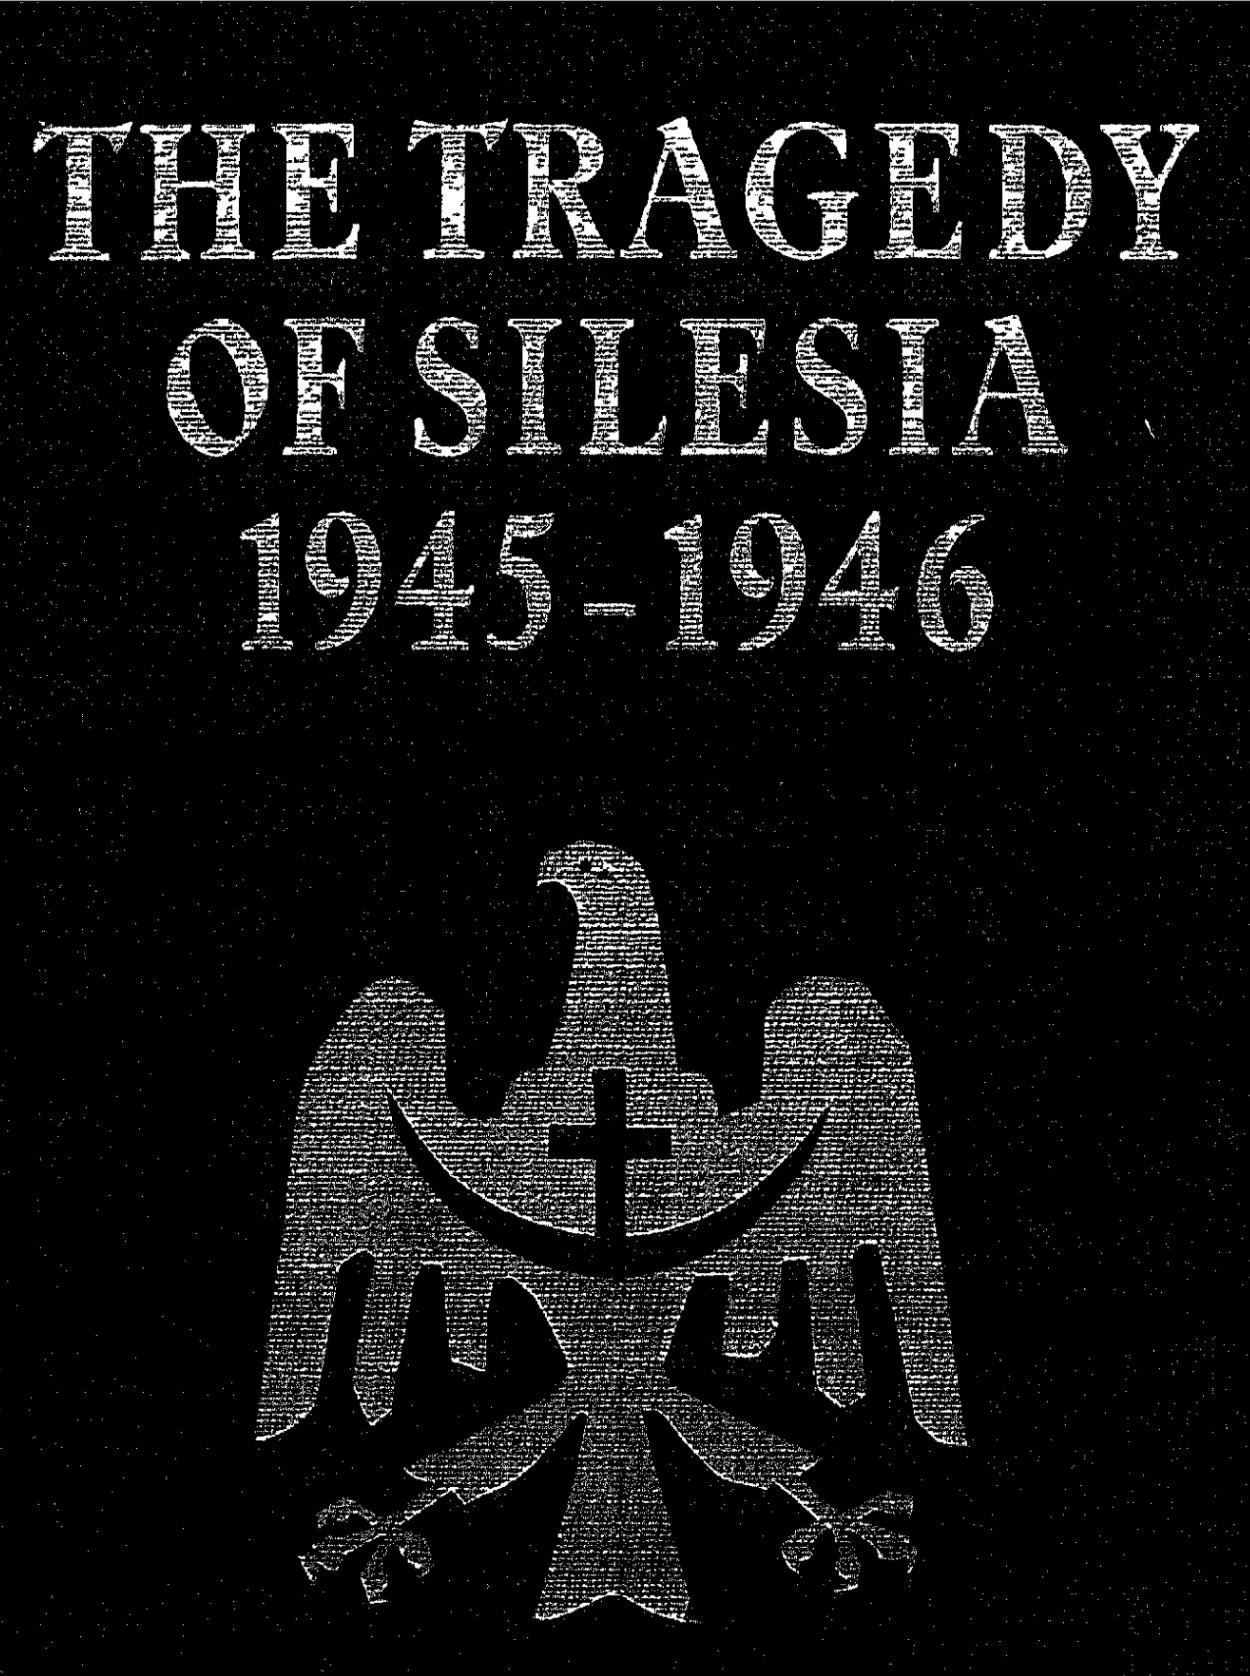 The Tragedy of Silesia 1945-1946: A Special Survey Of The Archdiocese Of Breslau (1953) by Johannes Kaps